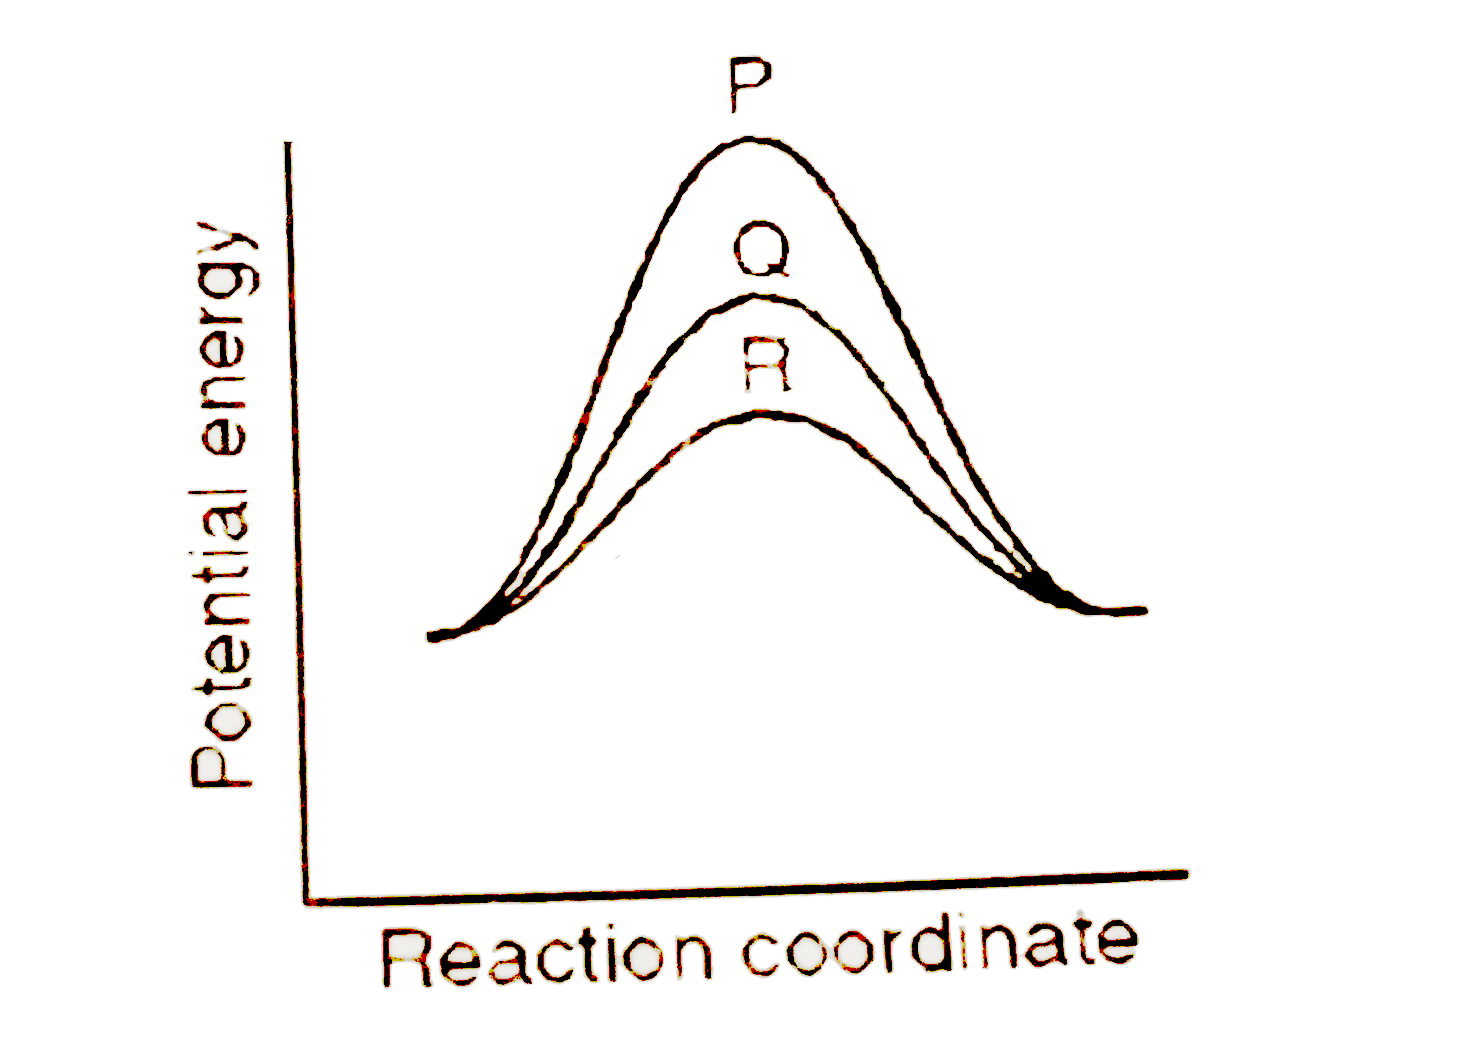 If a homogeneous catalytic reaction can take place through three alternative paths as depicted below, the catalytic efficiency of P,Q R representing the relative case would be